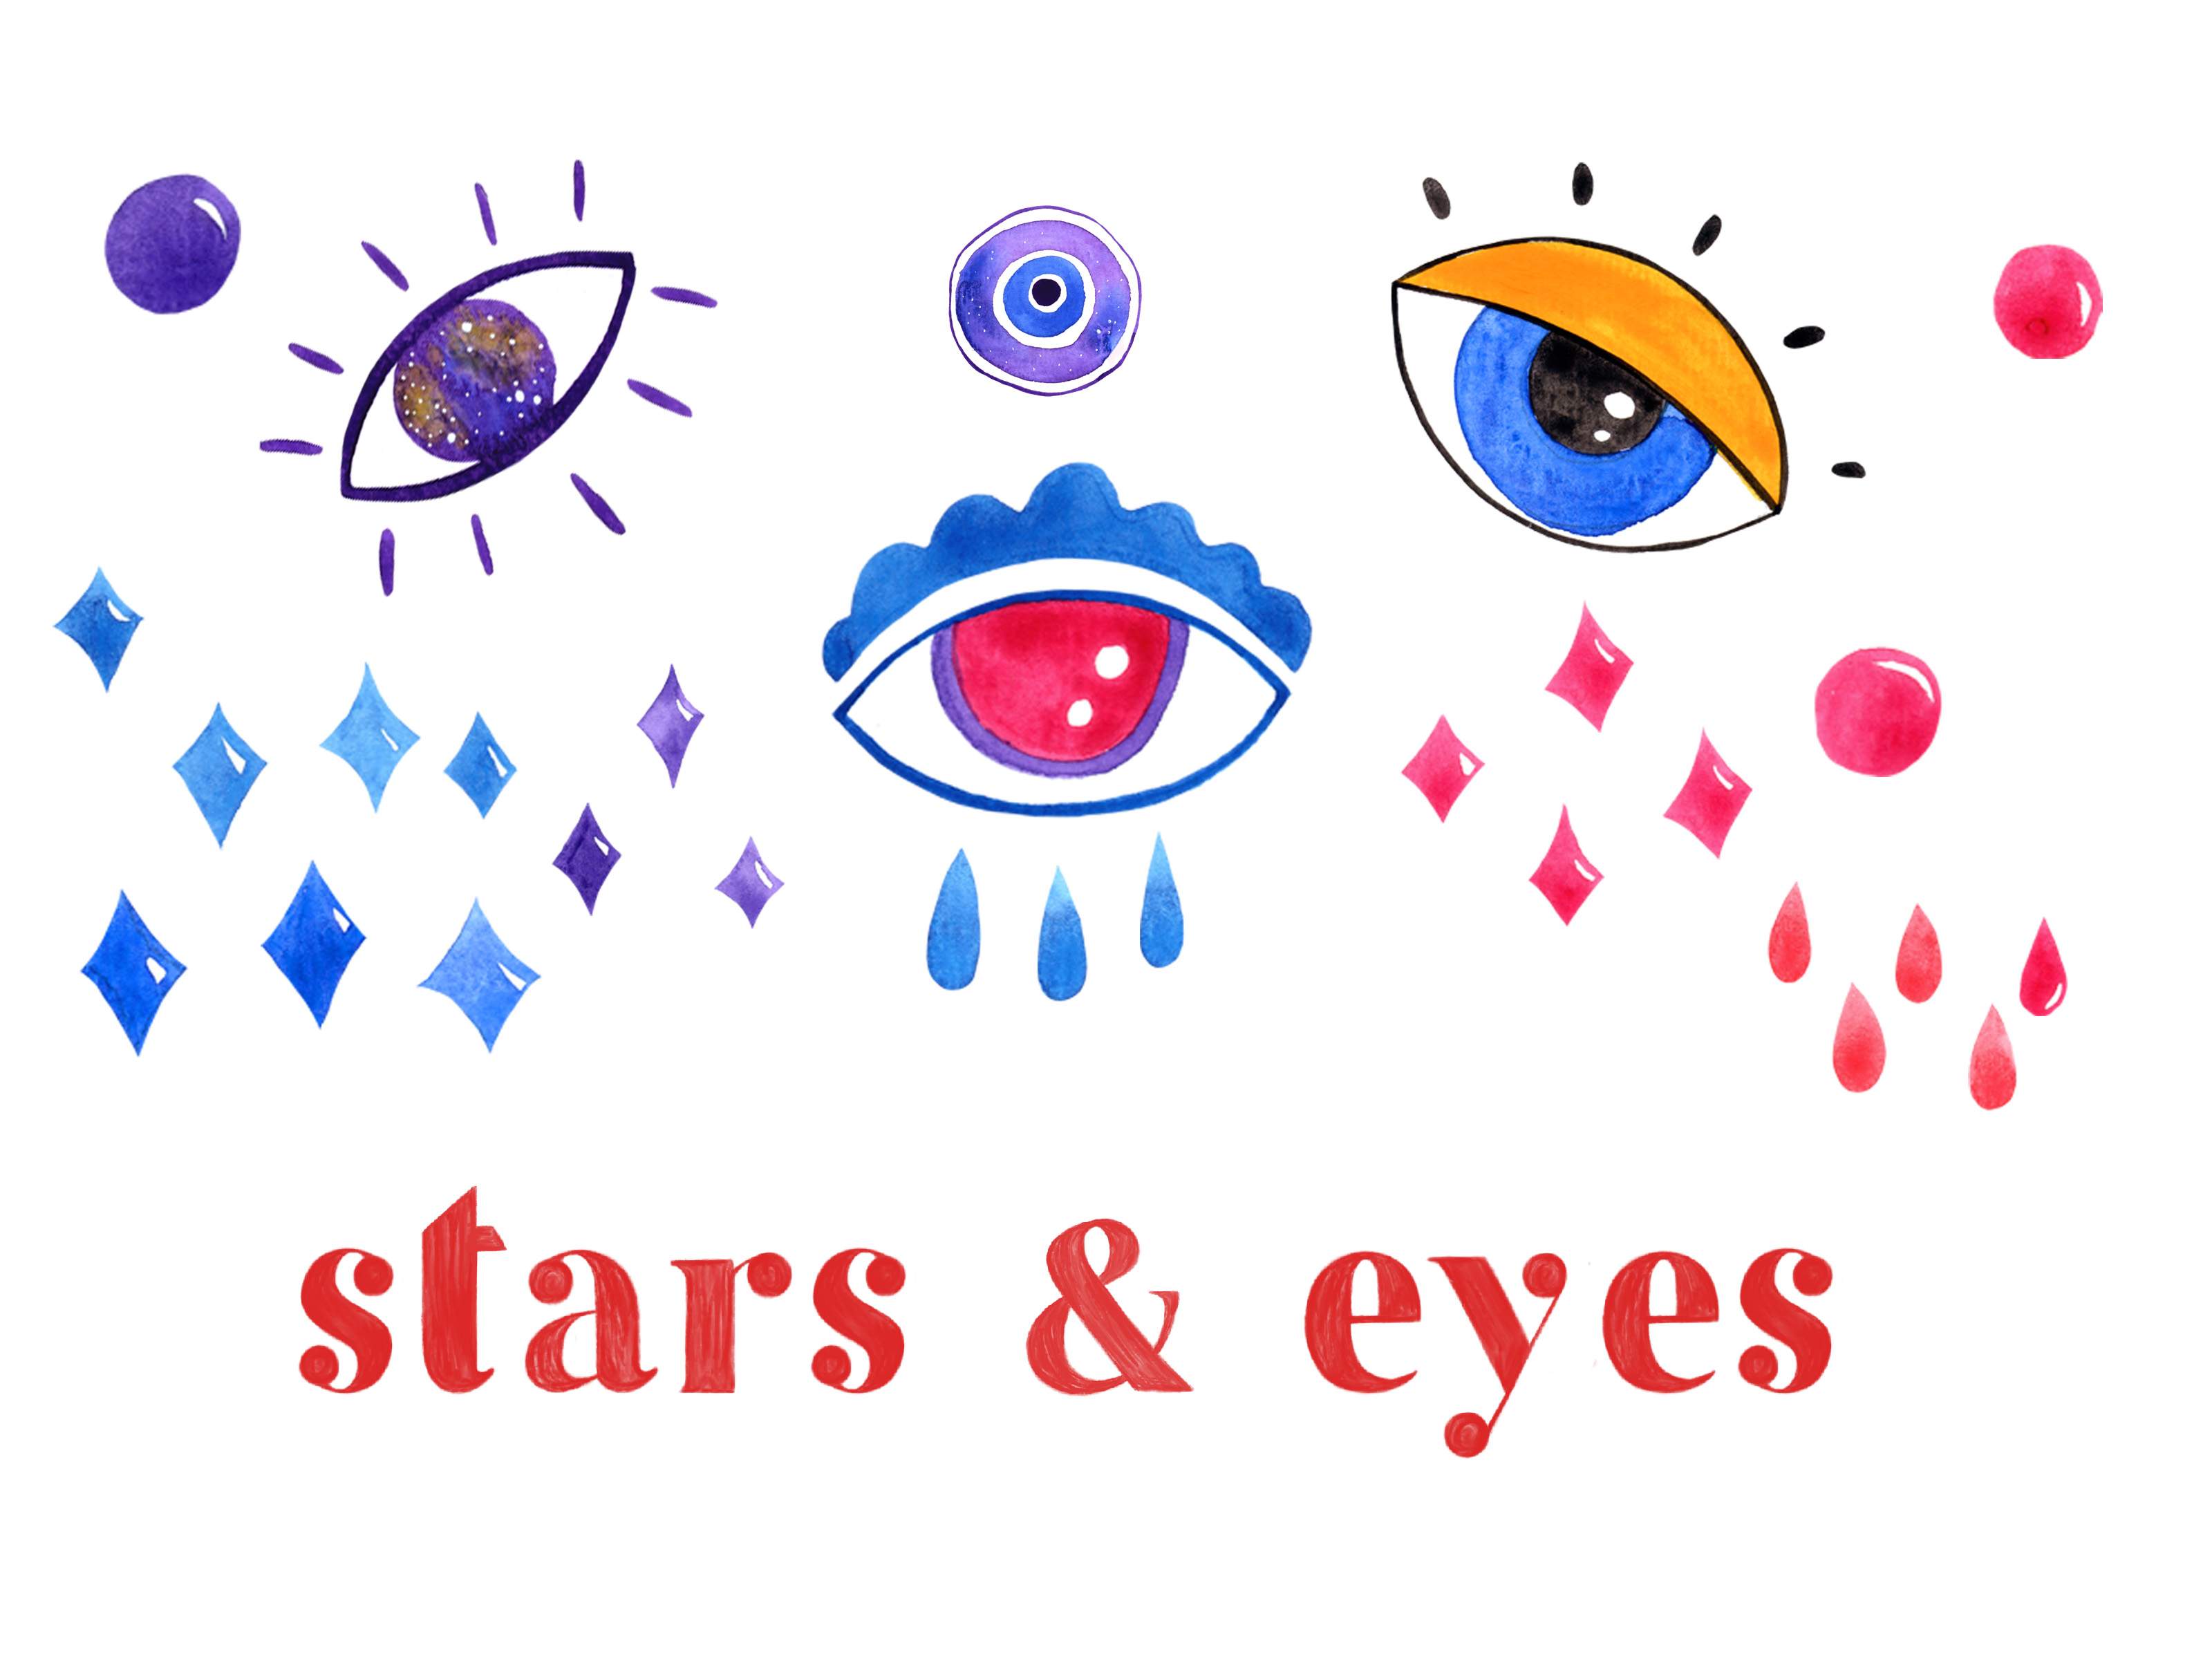 Drawing of stars and eyes on a white background.